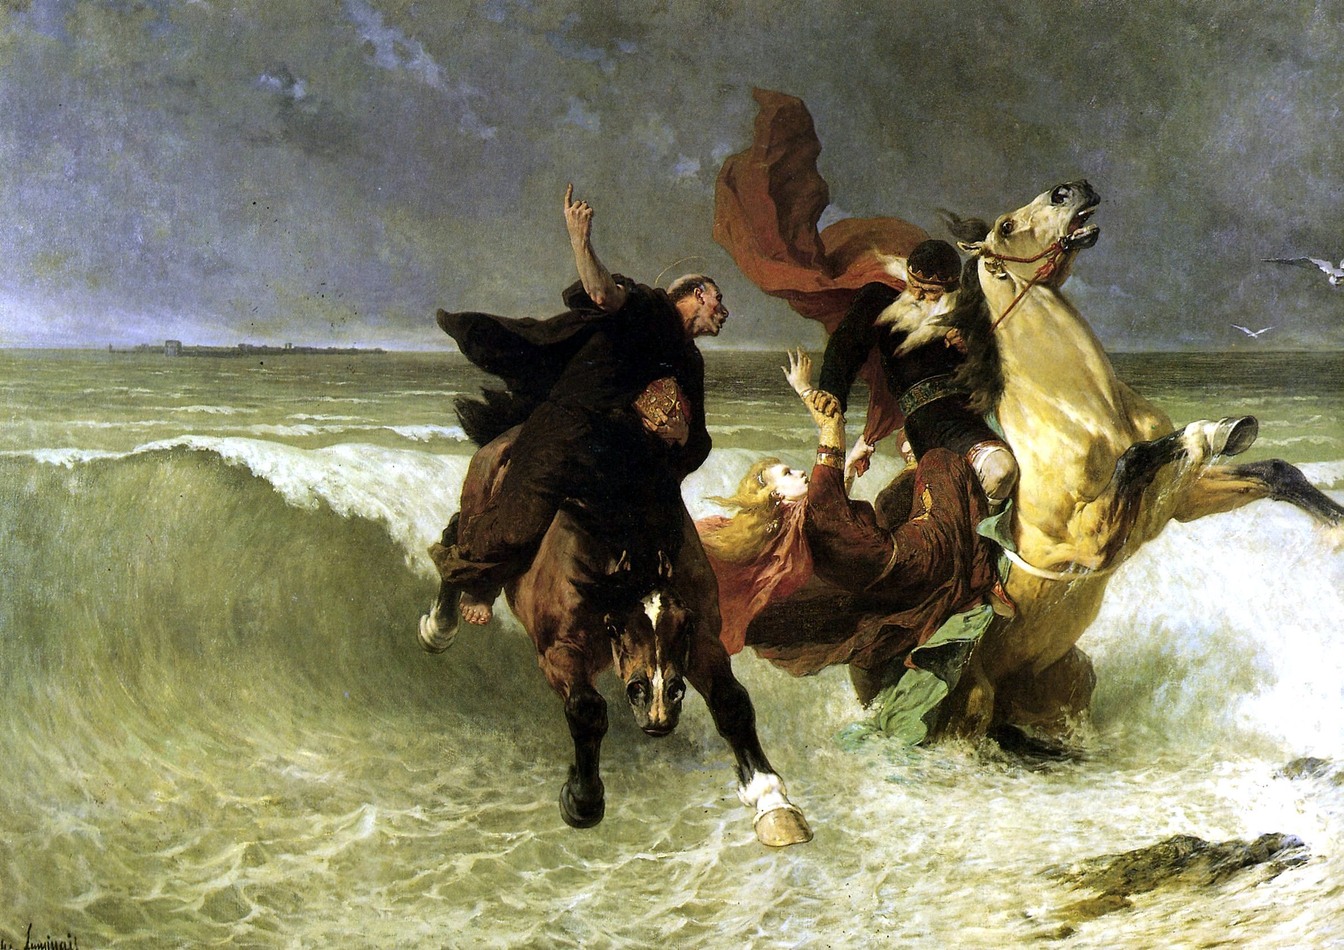 A young woman falling from a horse’s back as another attempts to pull her up as the horse jerks awkwardly on the seashore